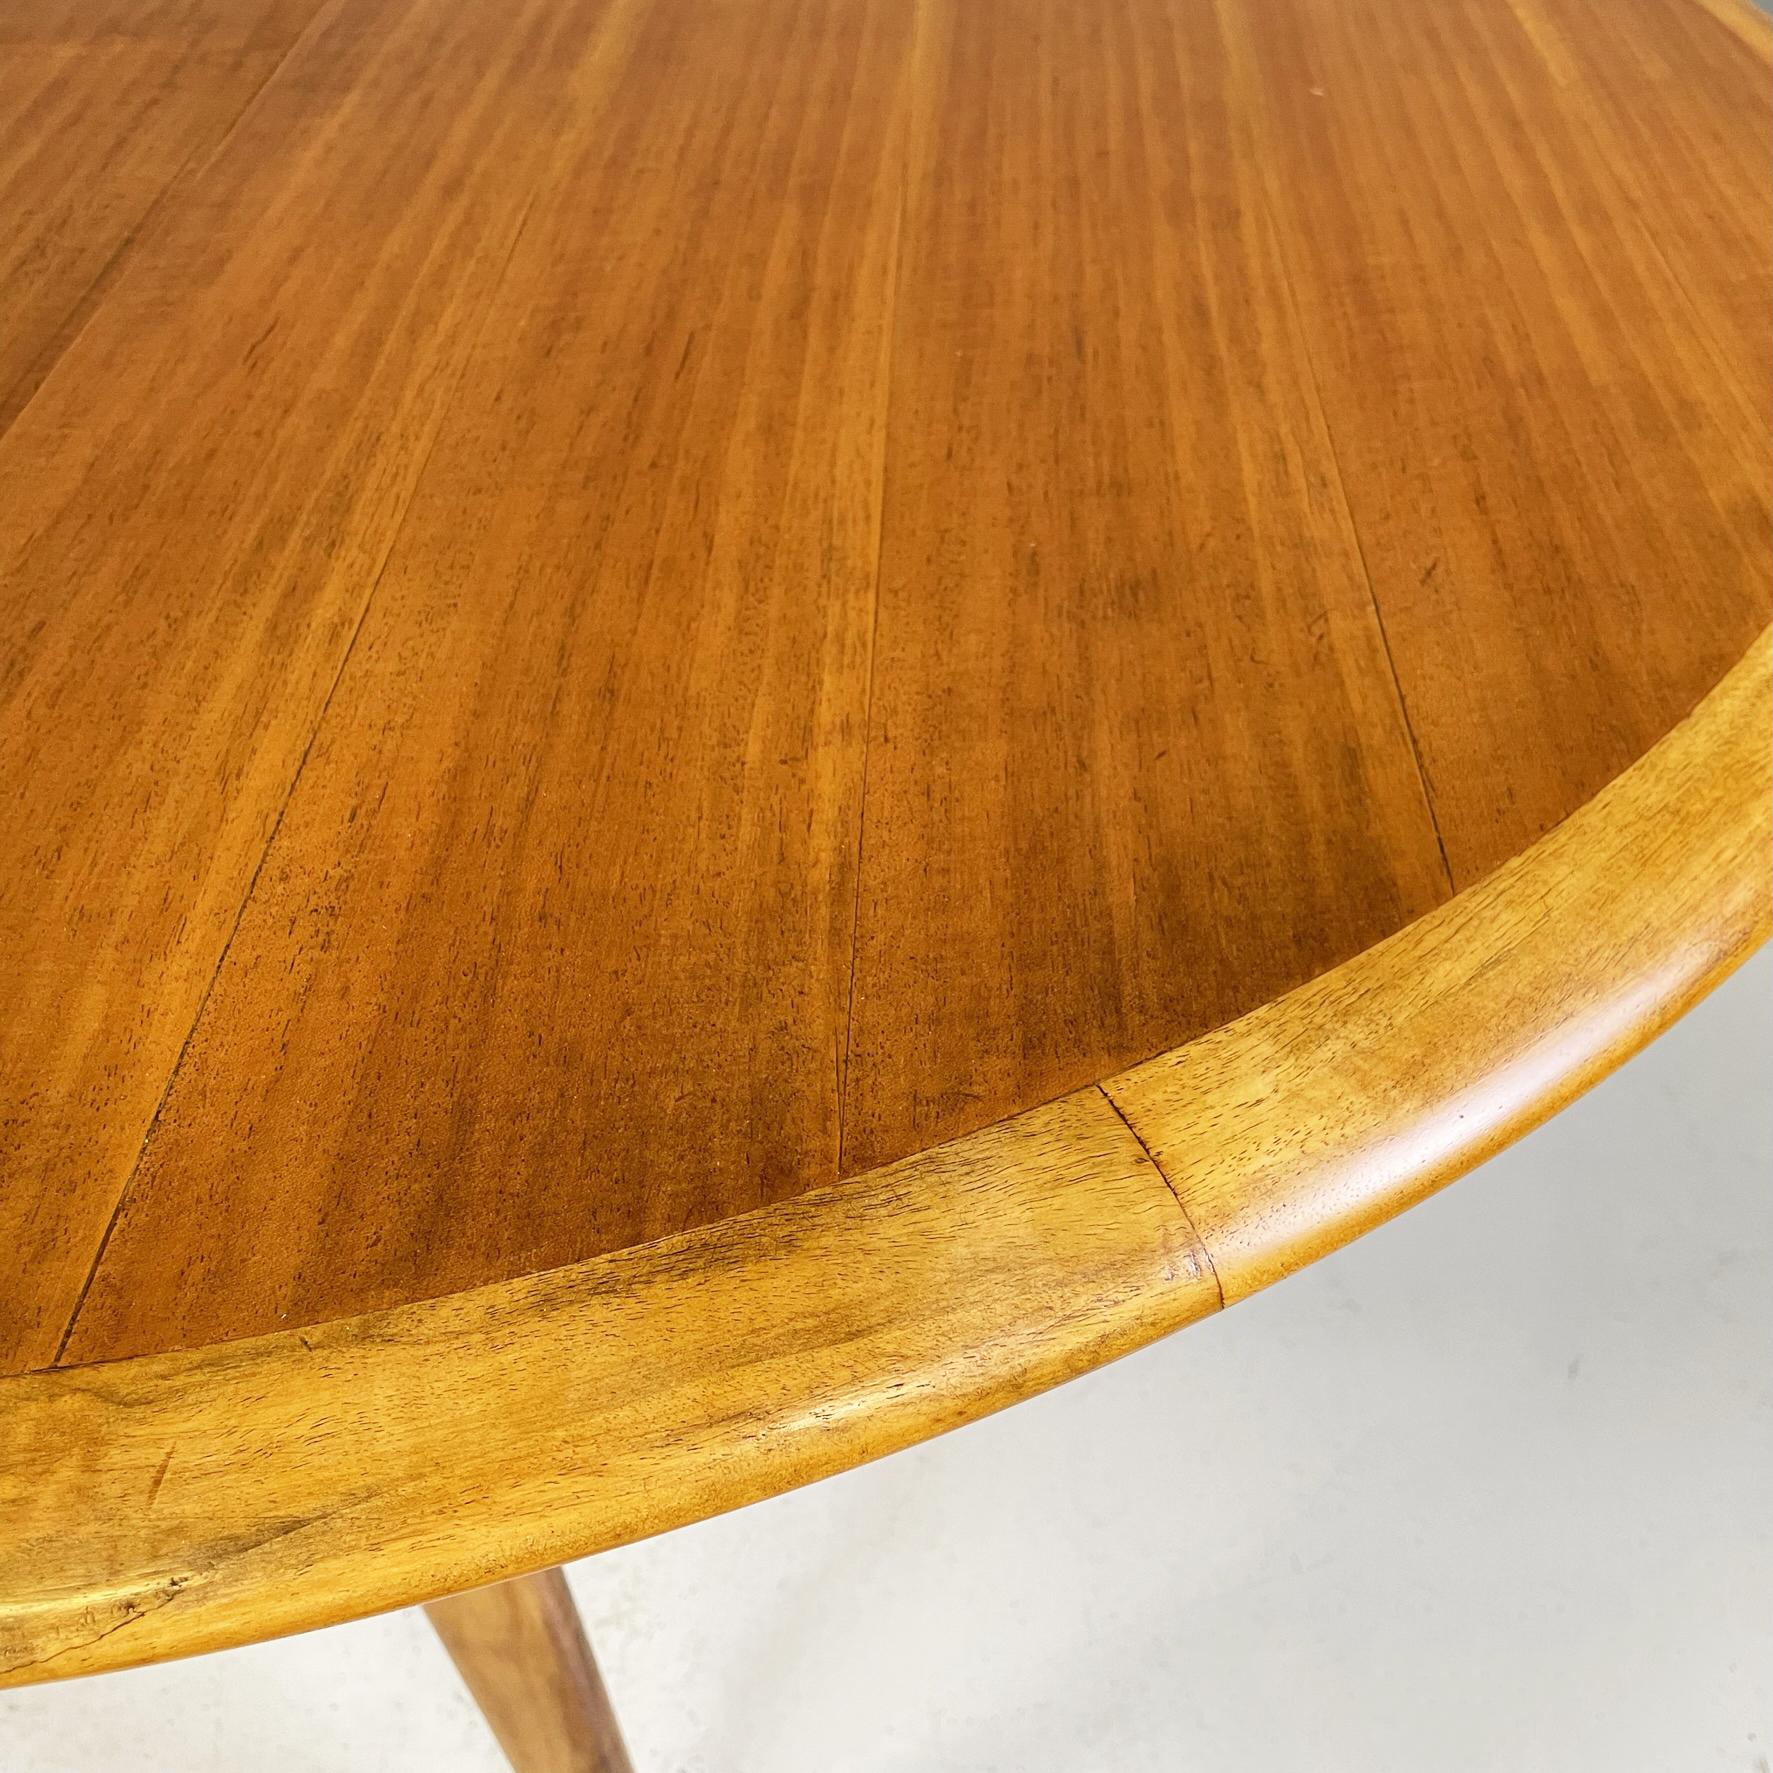 North Europa Midcentury Oval Round Wooden Dining Table with Extensions, 1960s For Sale 3